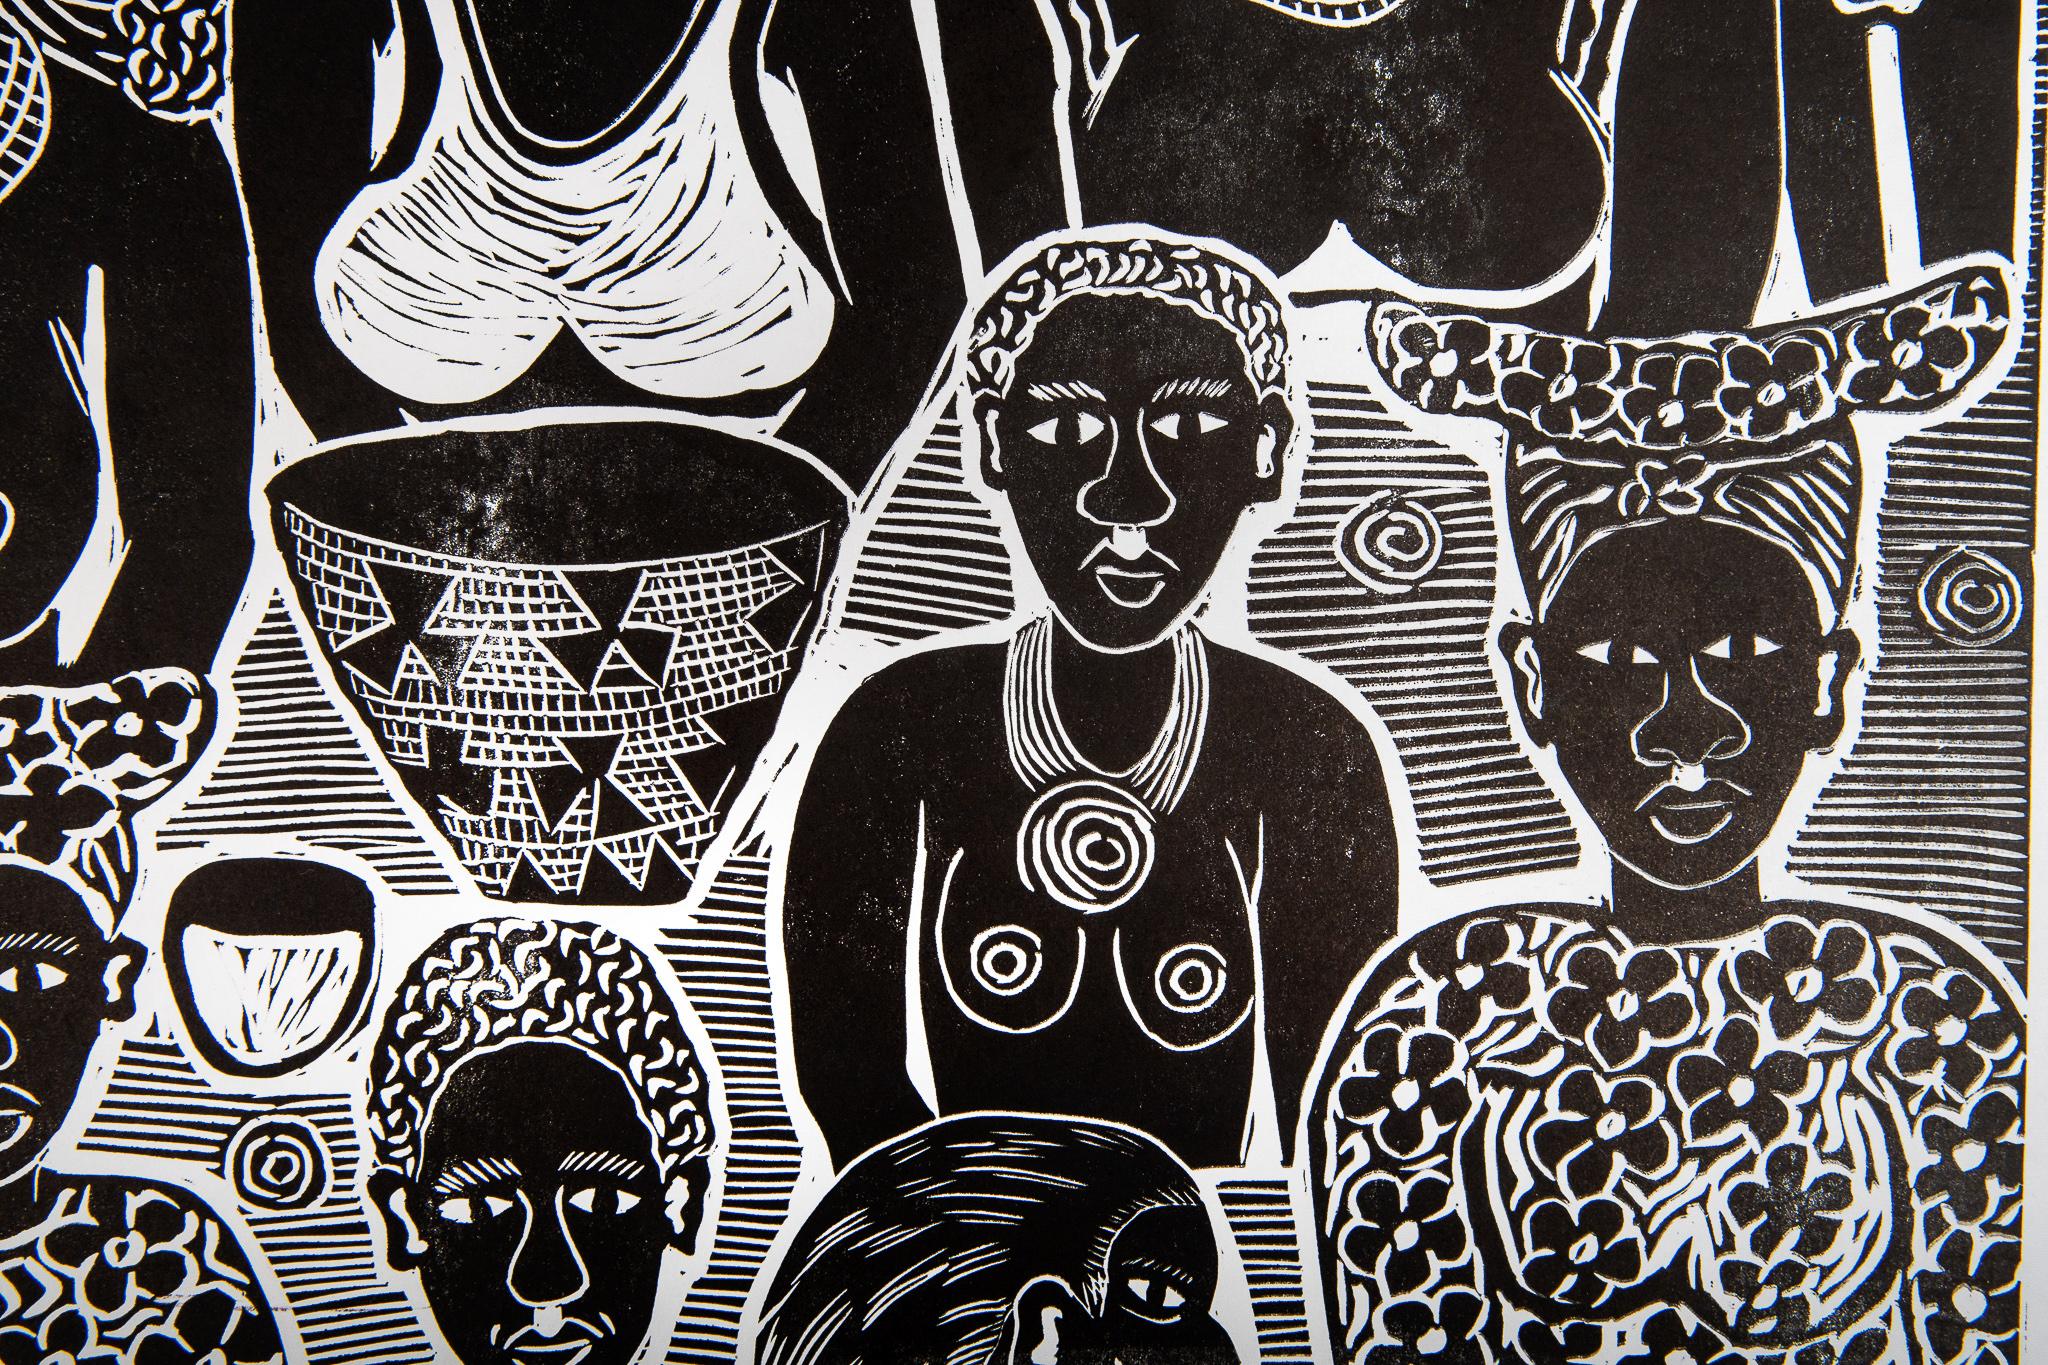 We are your mothers, 2019. Linoleum block print on paper. Unlimited edition.

Elia Shiwoohamba was born in 1981 in Windhoek, Namibia. He graduated from the John Muafangejo Art Centre in Windhoek in 2006. Specialising in printmaking and sculpture,